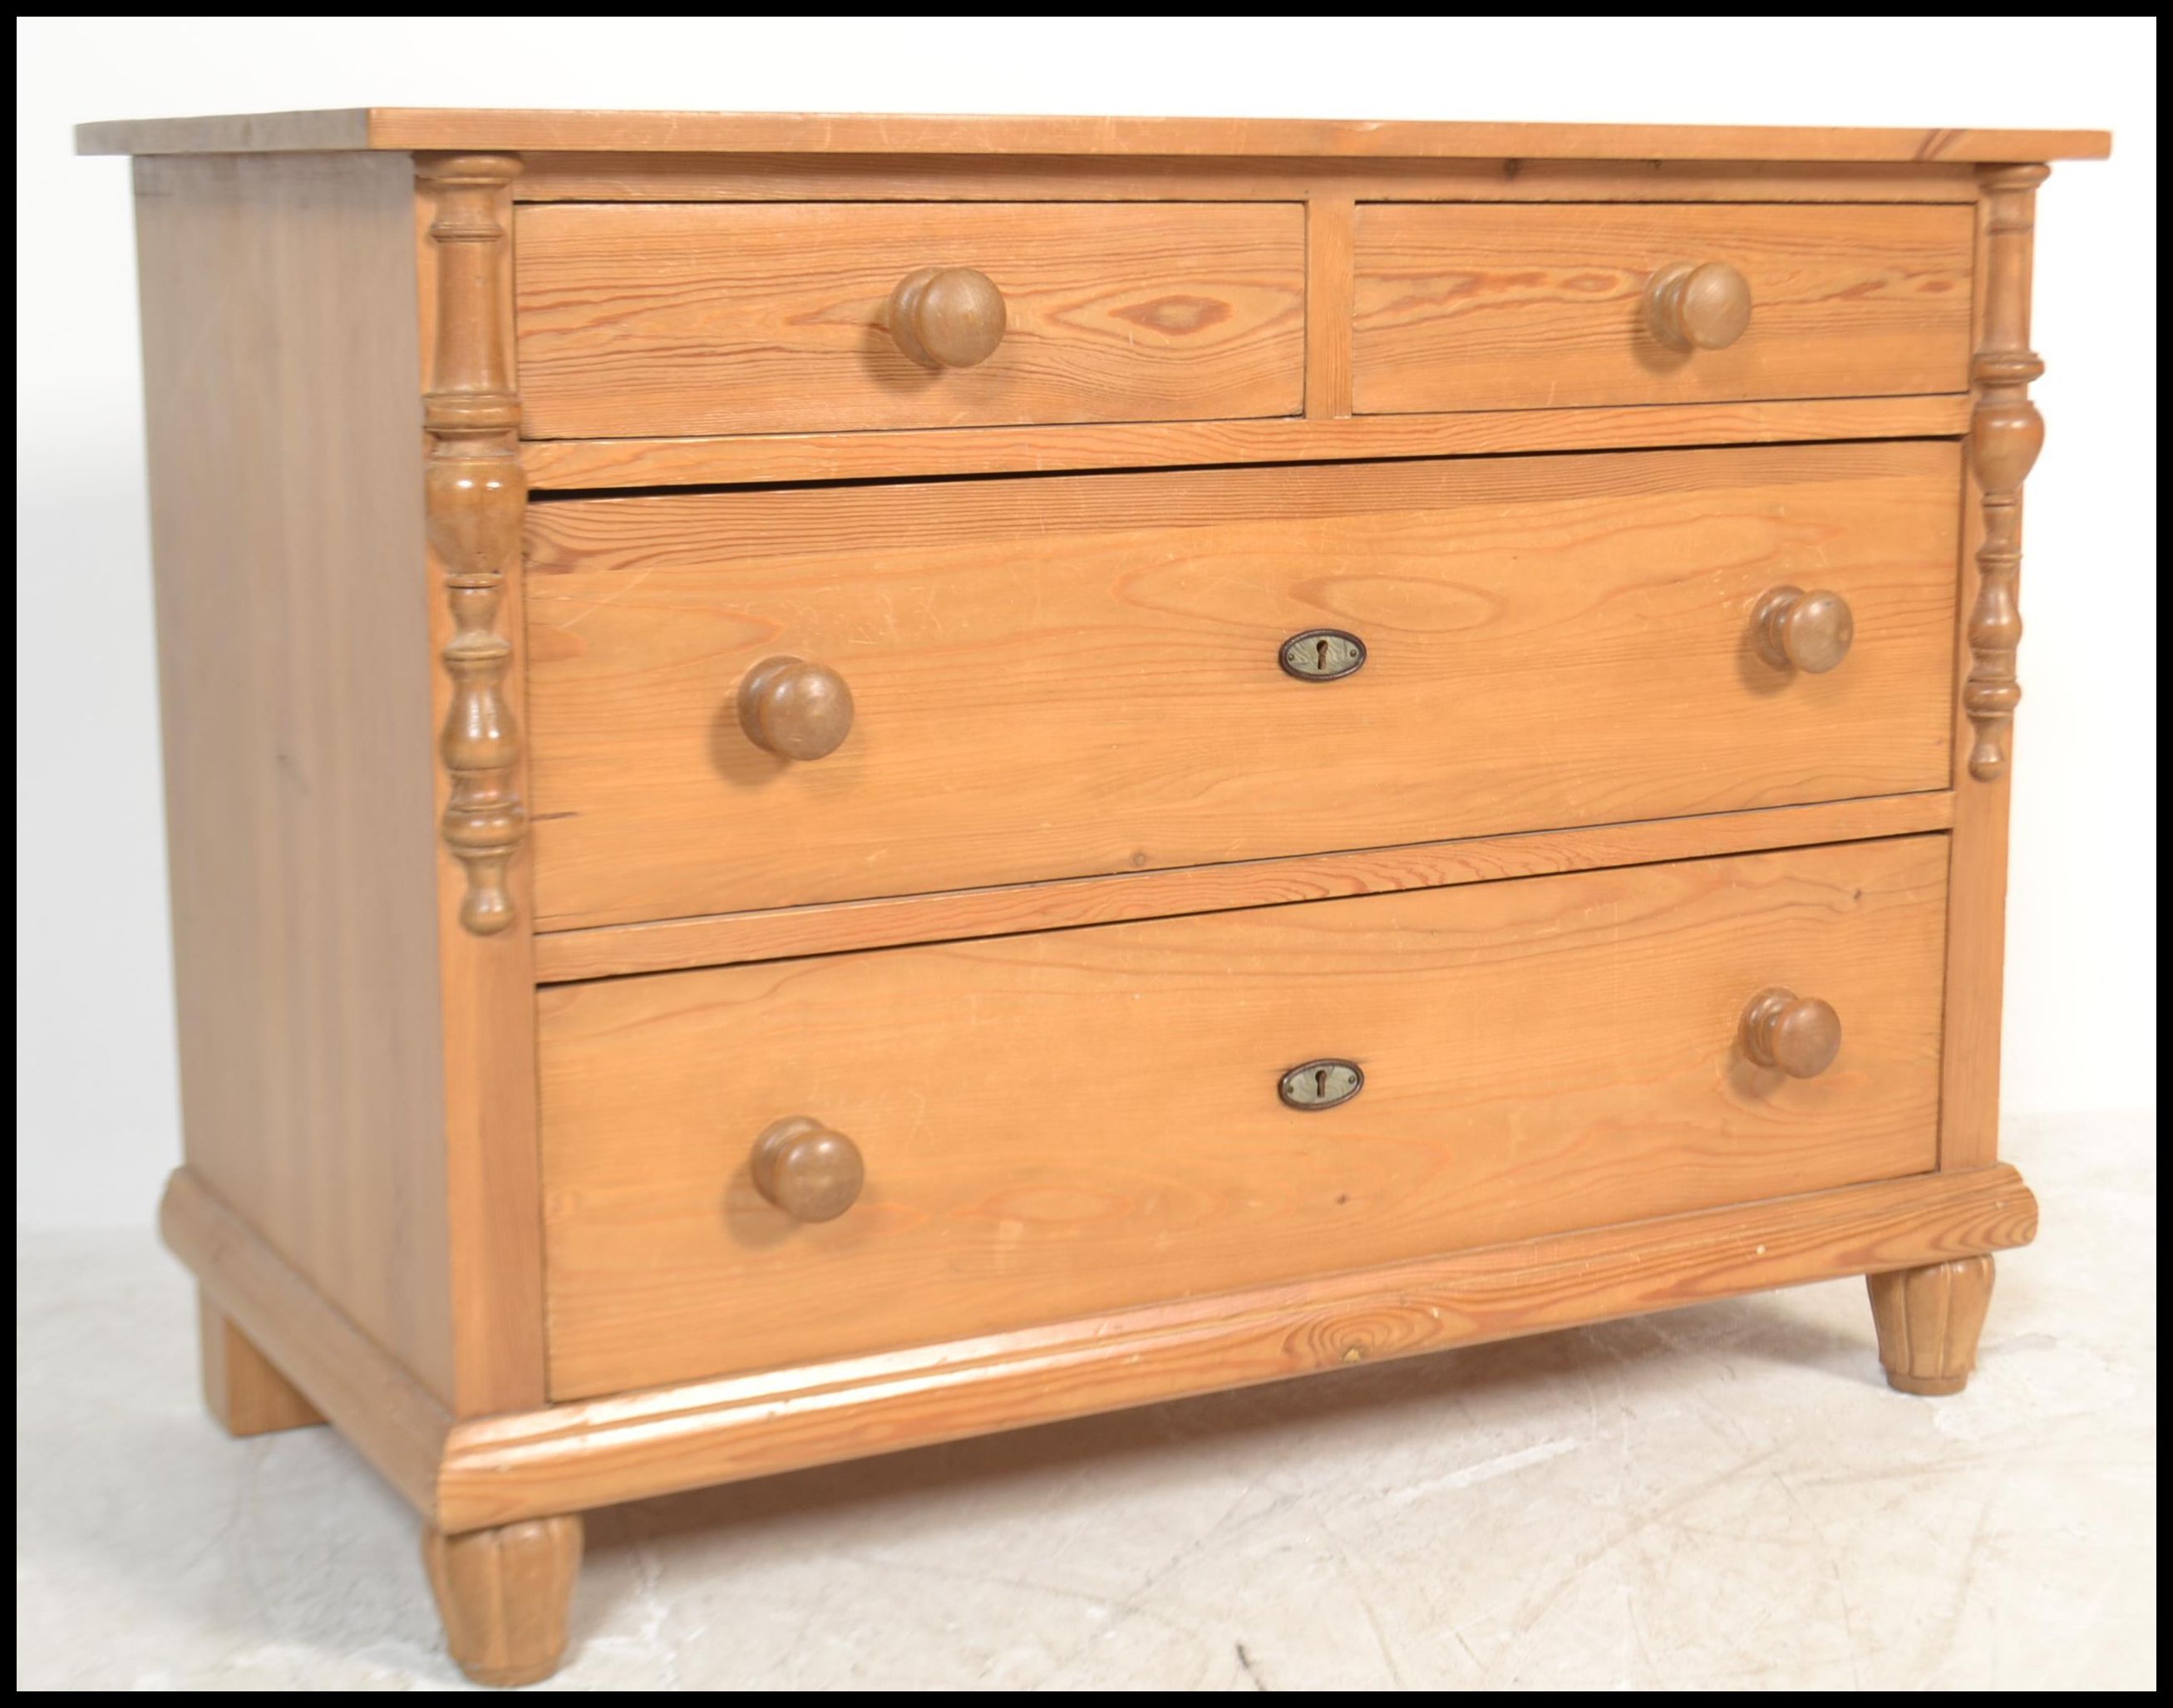 An antique style Scandinavian pine chest of drawers having 2 short and 2 deep drawers with flared